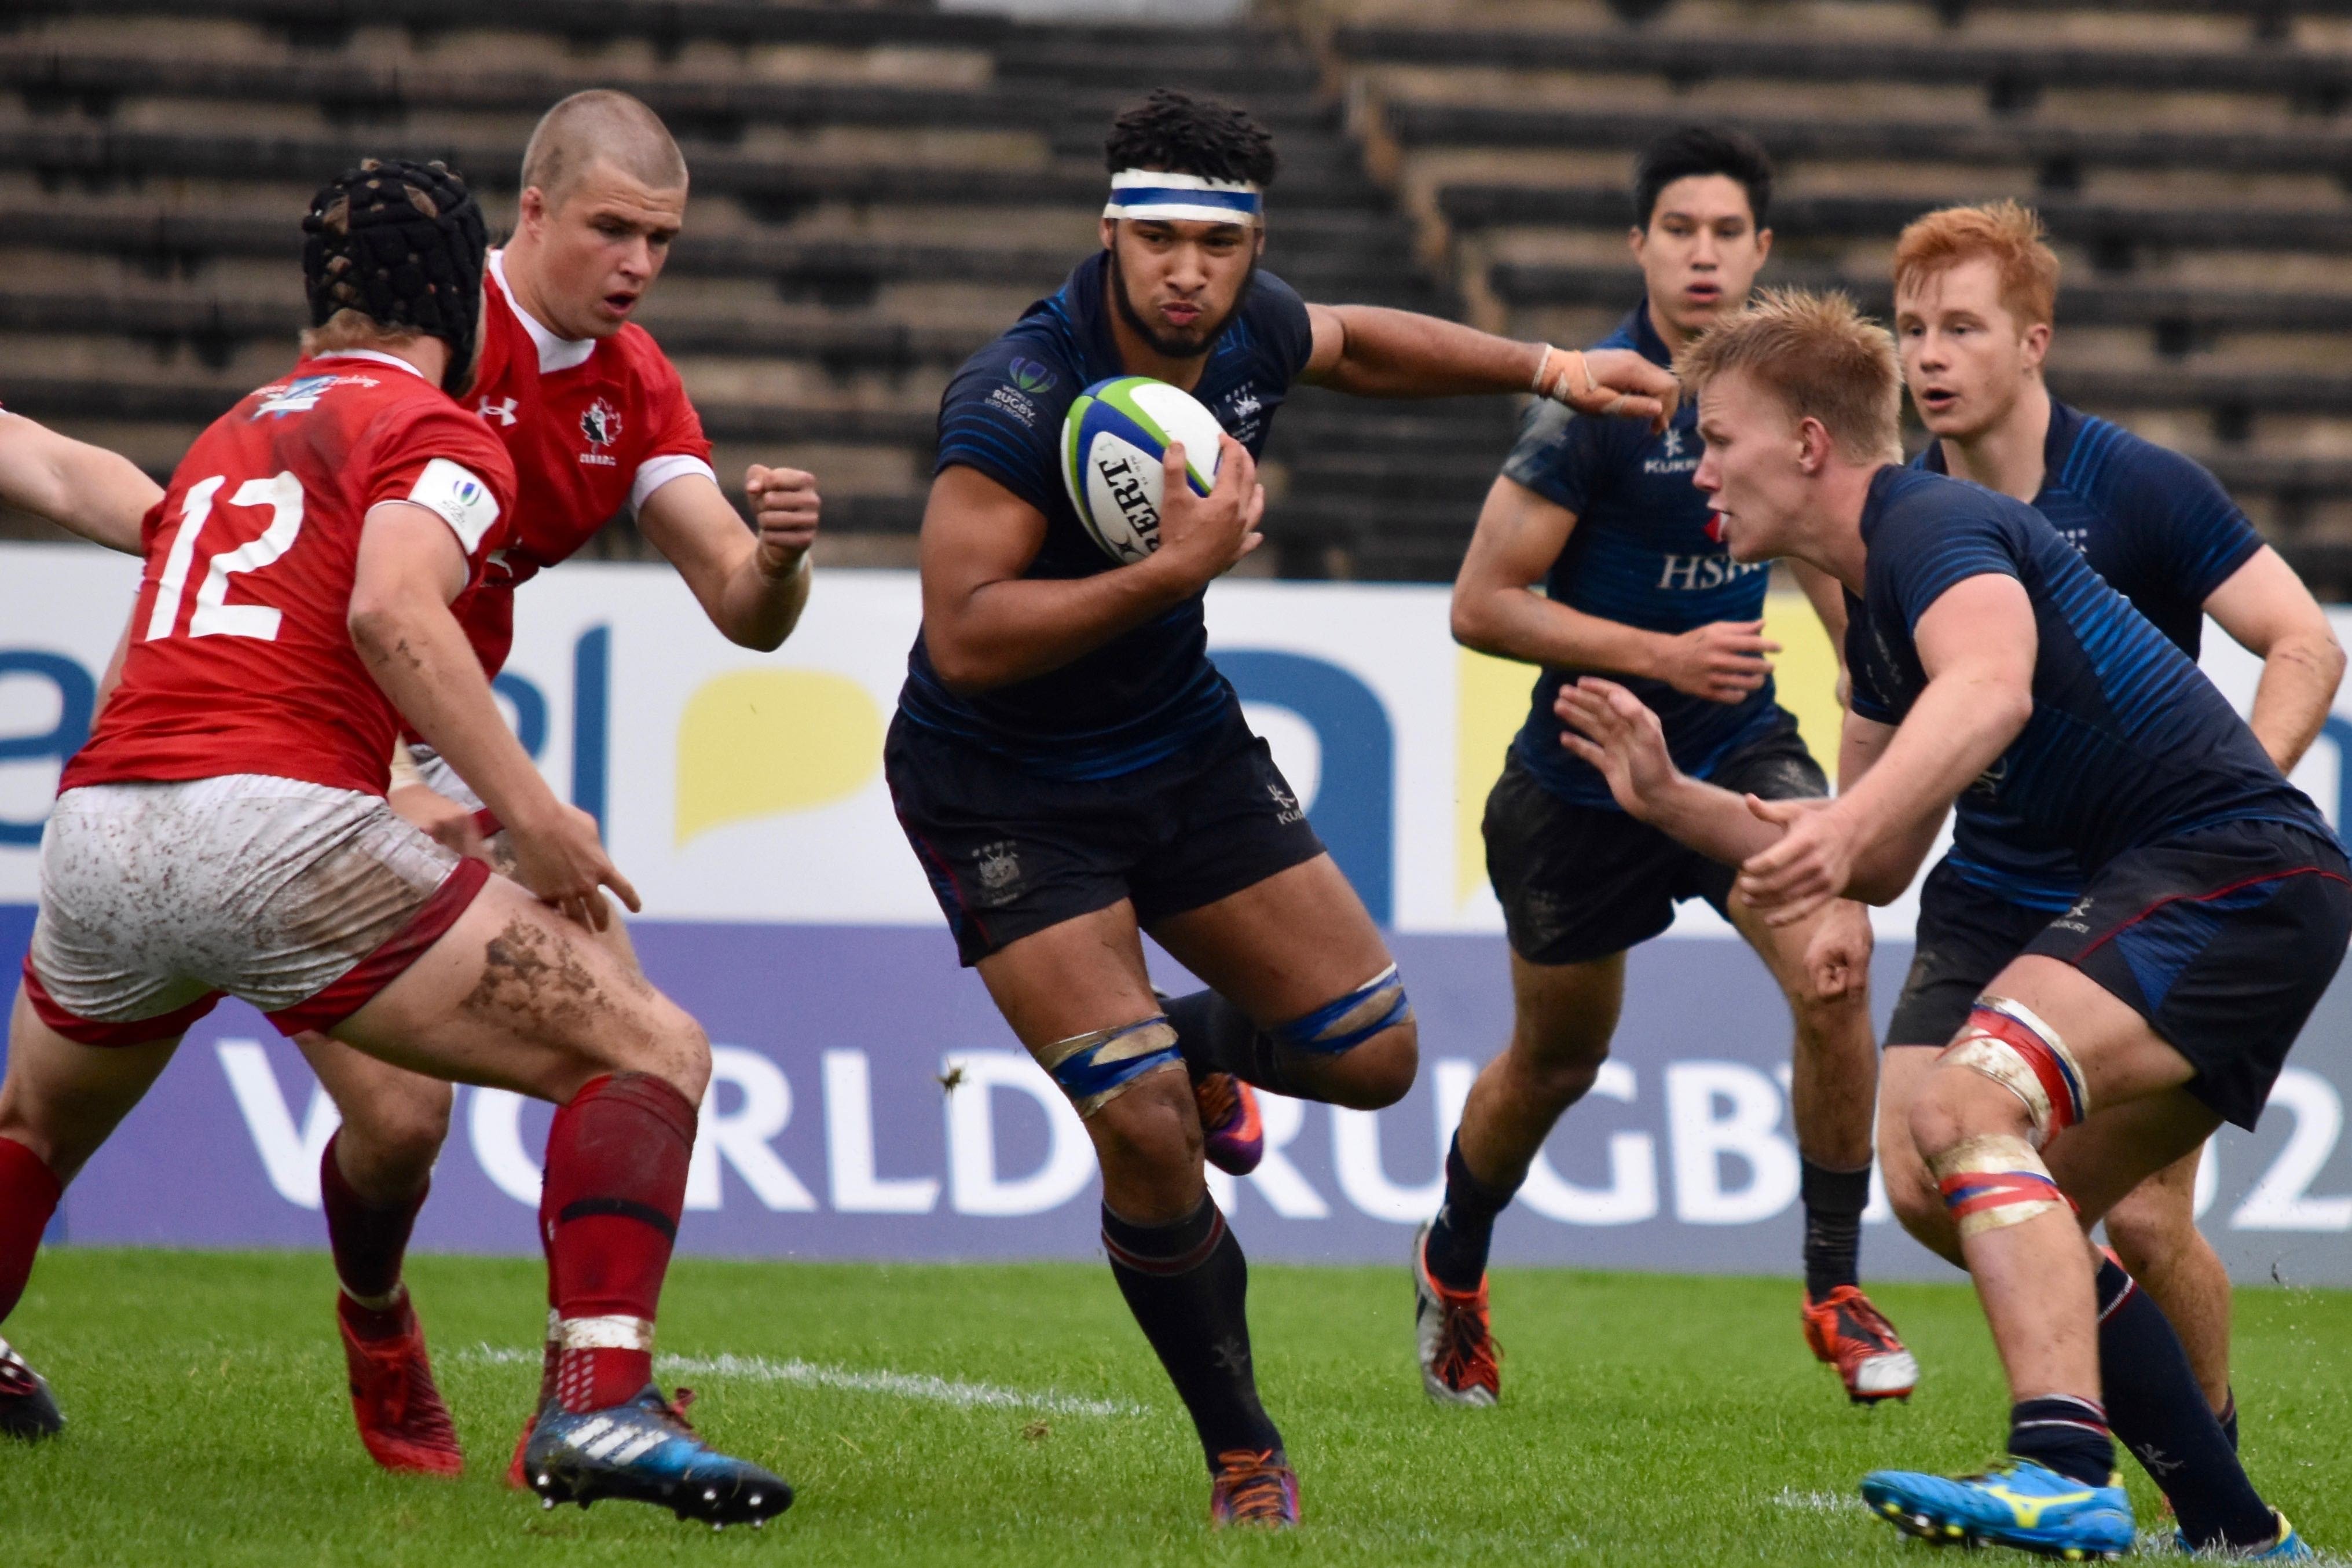 Max Denmark hunts for a gap in Hong Kong's loss to Canada at the World Rugby U20 Trophy. Photo: HKRU